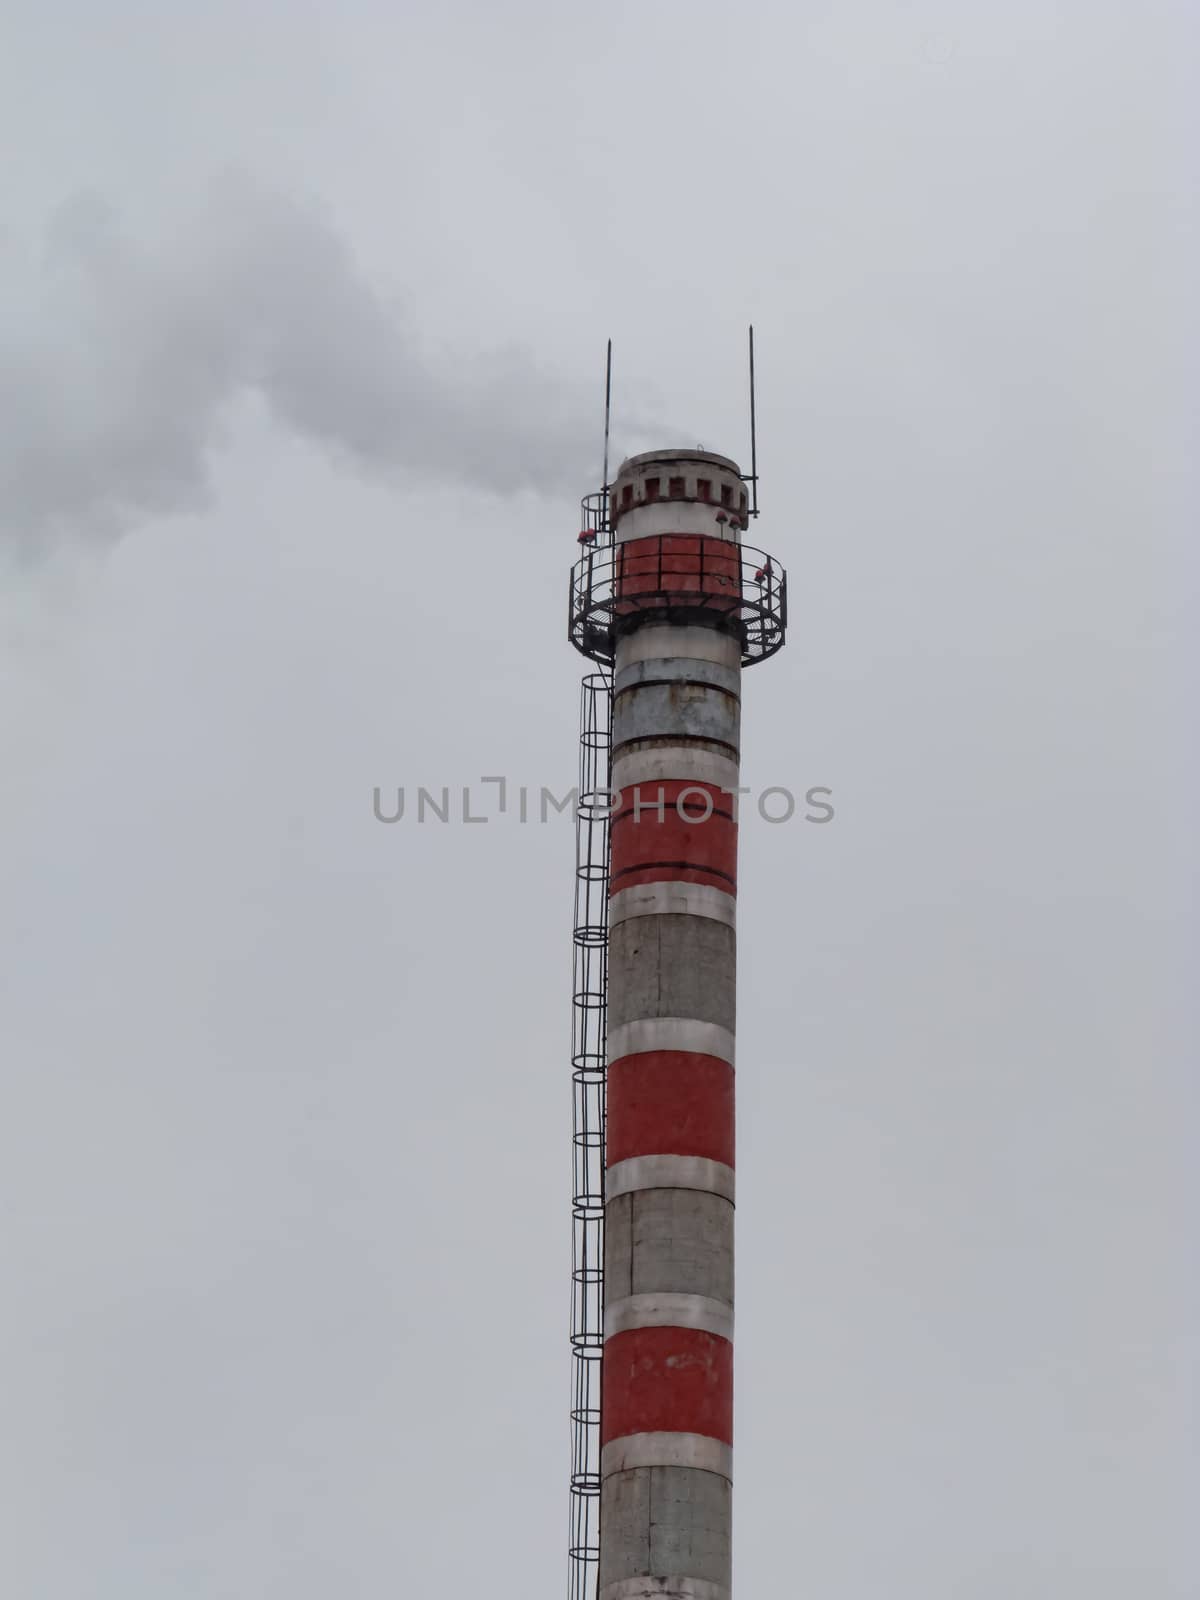 Smoke from factory tube on blue sky by bonilook